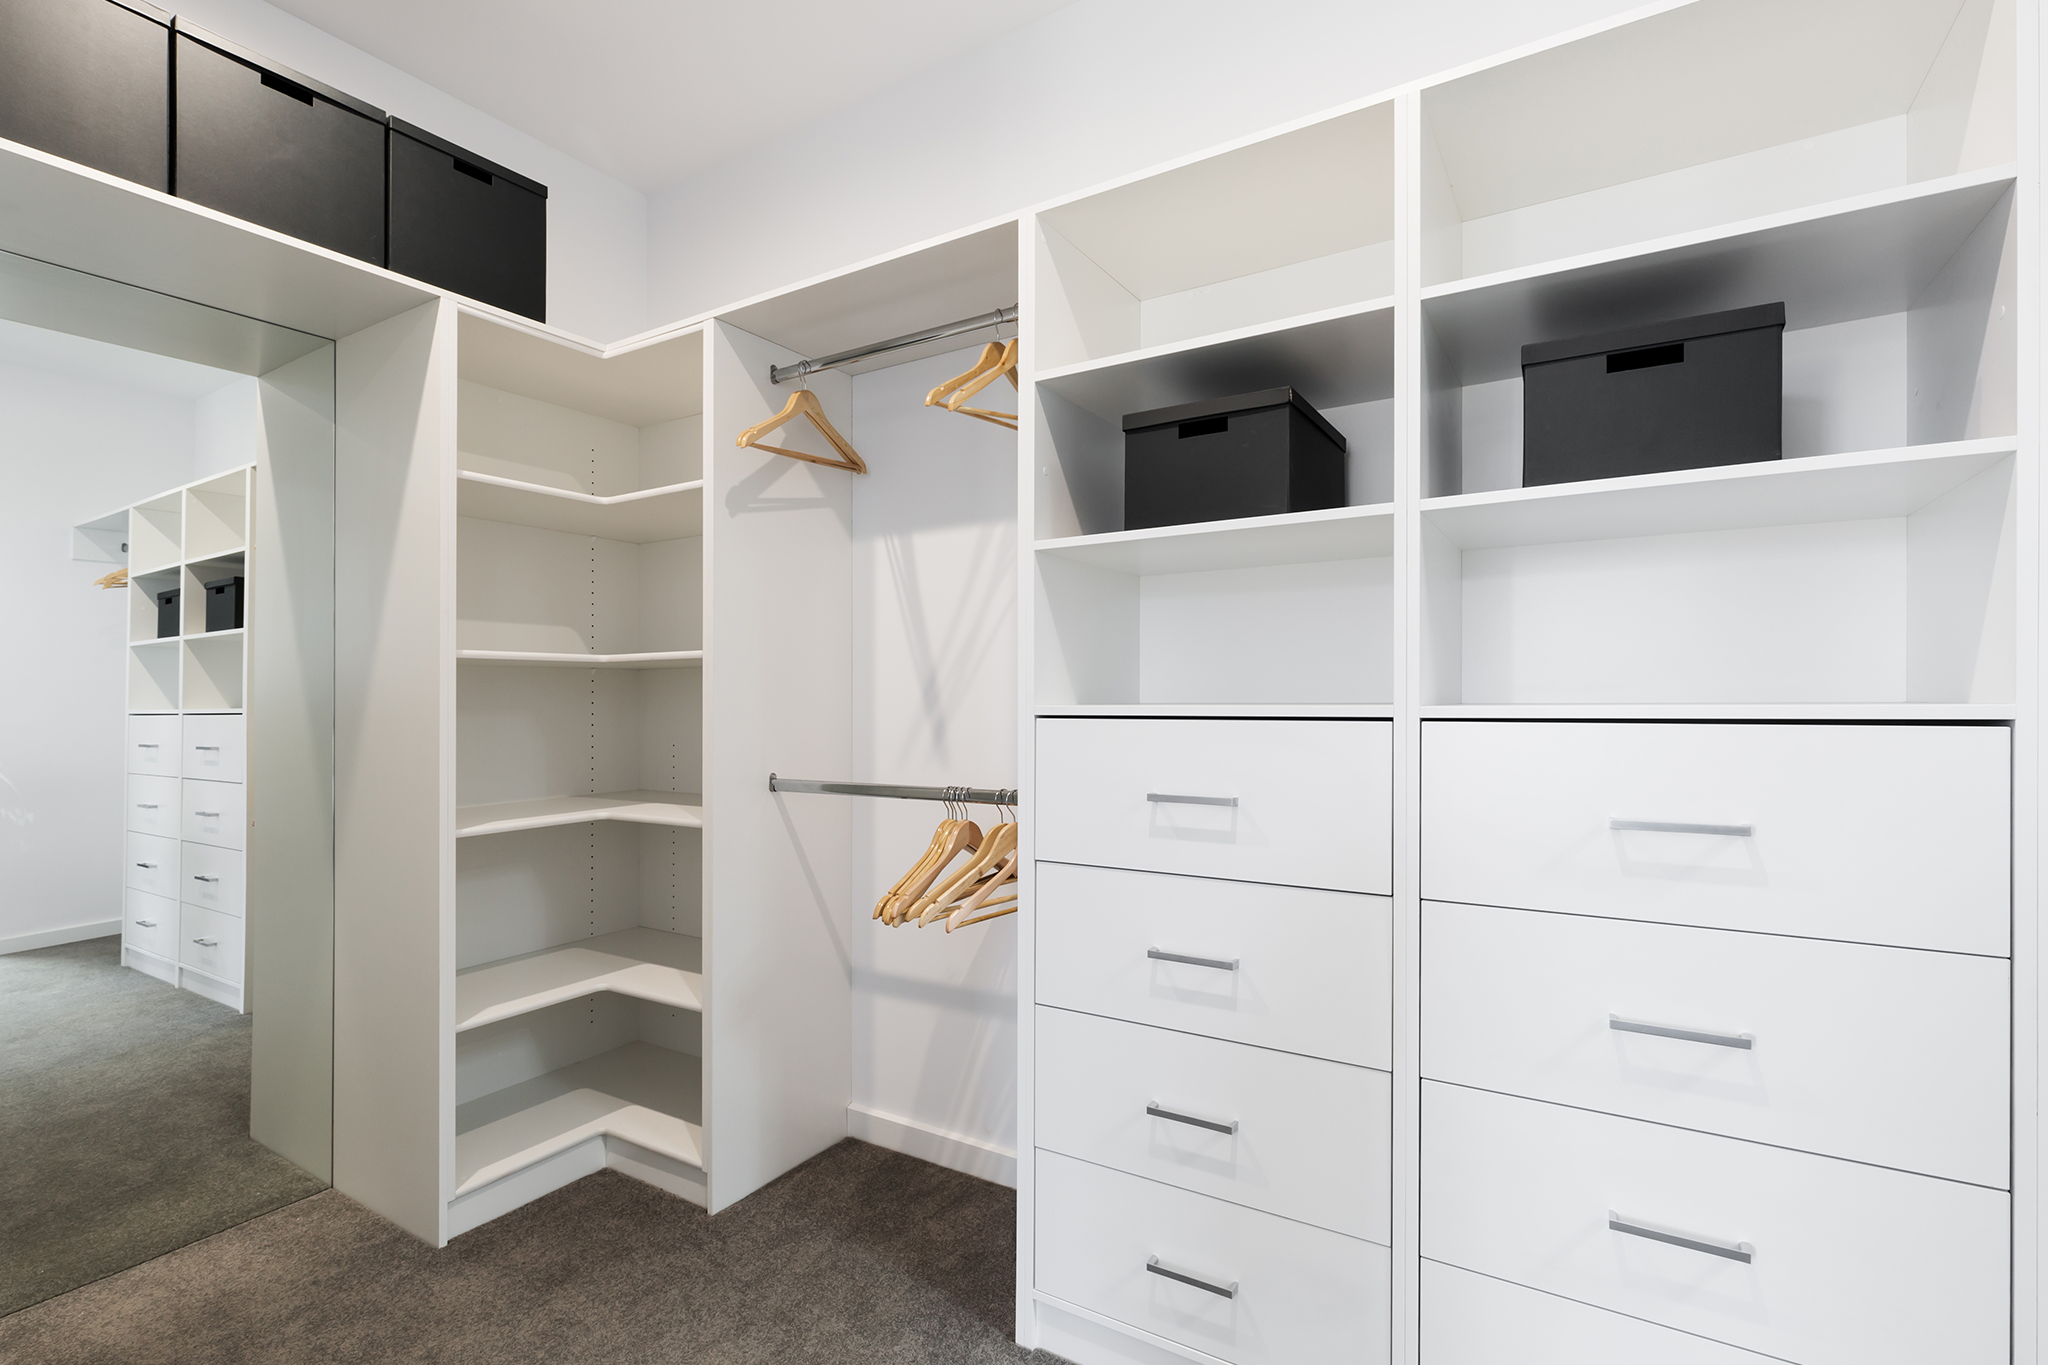 Tips for Planning the Perfect Walk-In Wardrobe